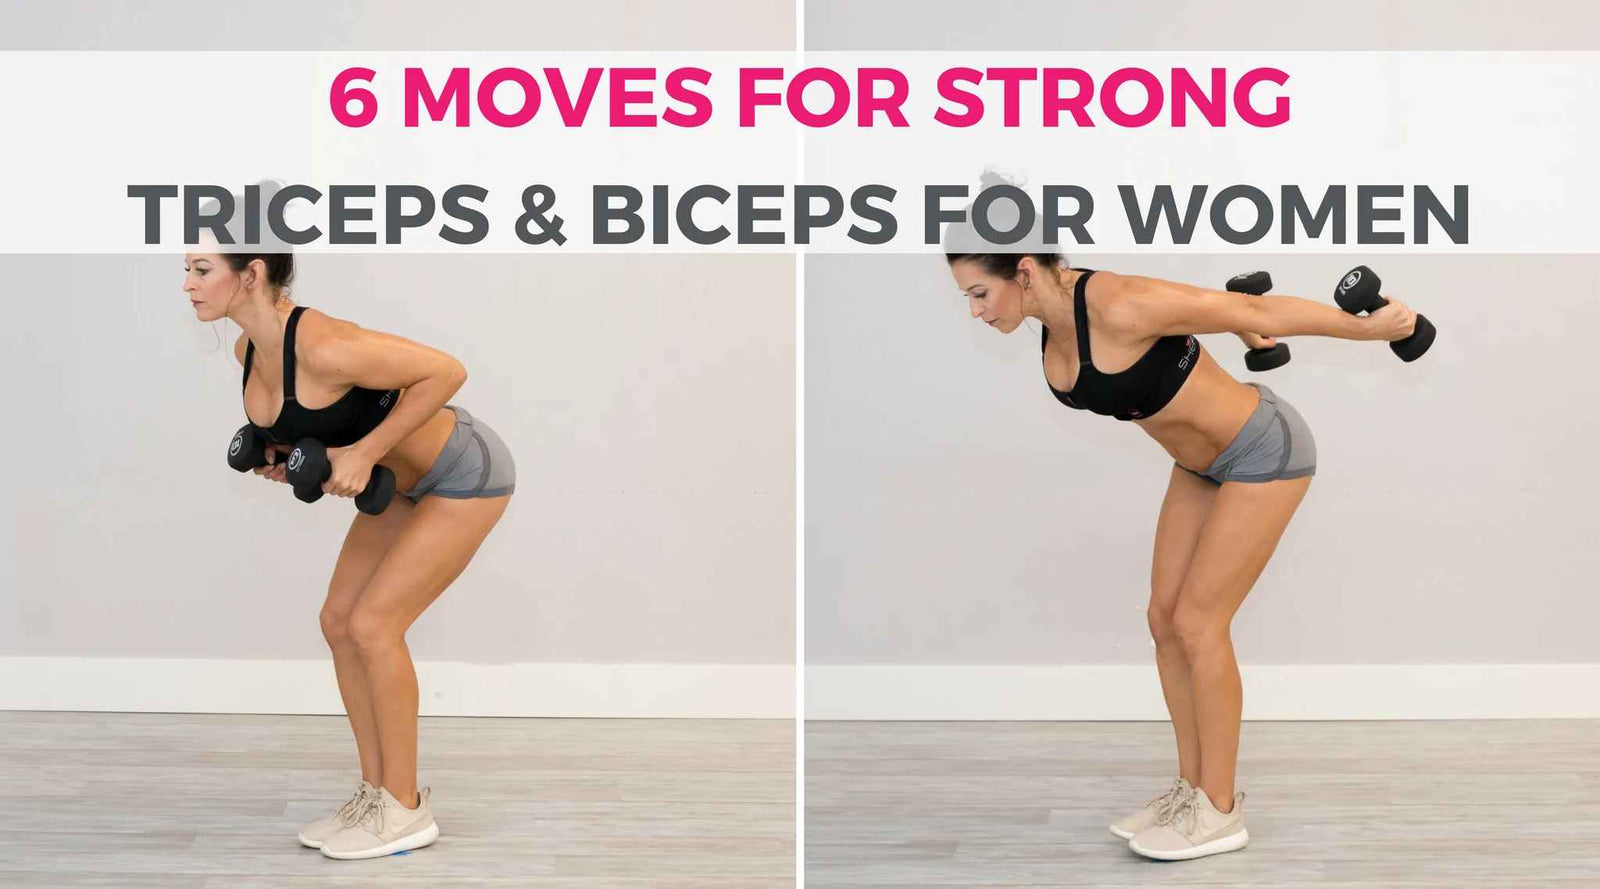 Arm Workouts at Home: These 20 Exercises Will Keep You Flexin